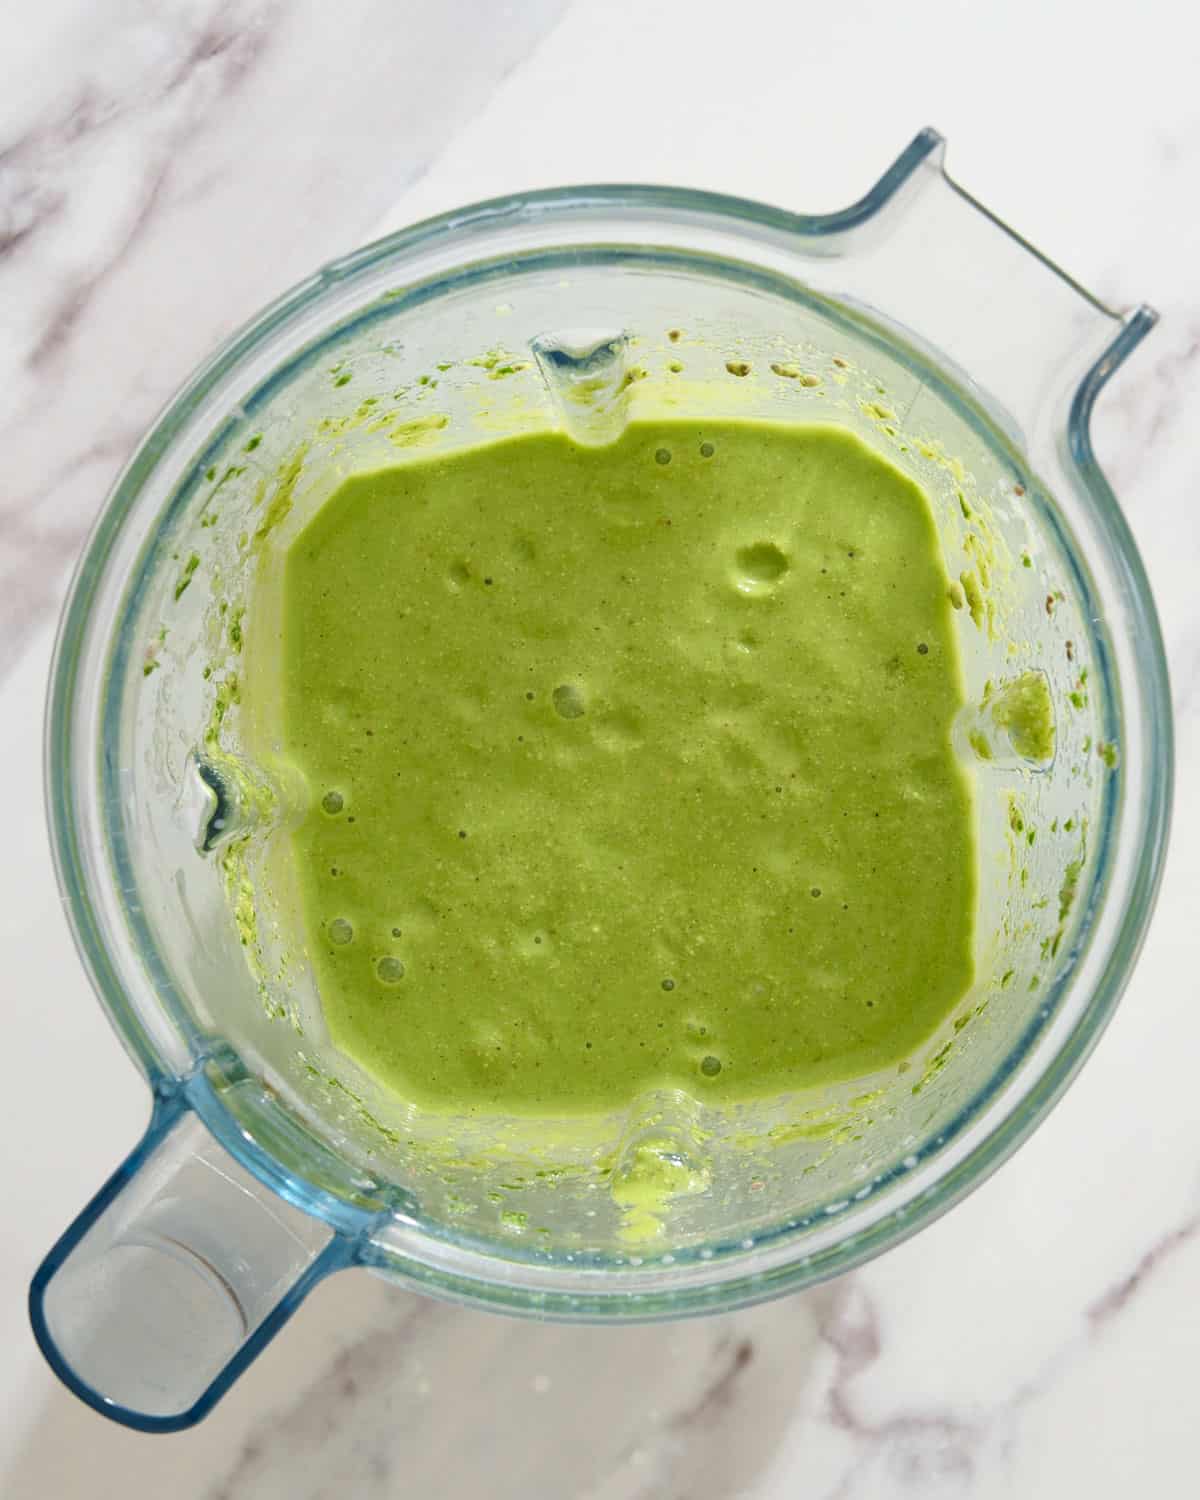 Kale and spinach smoothie blended in a blender.